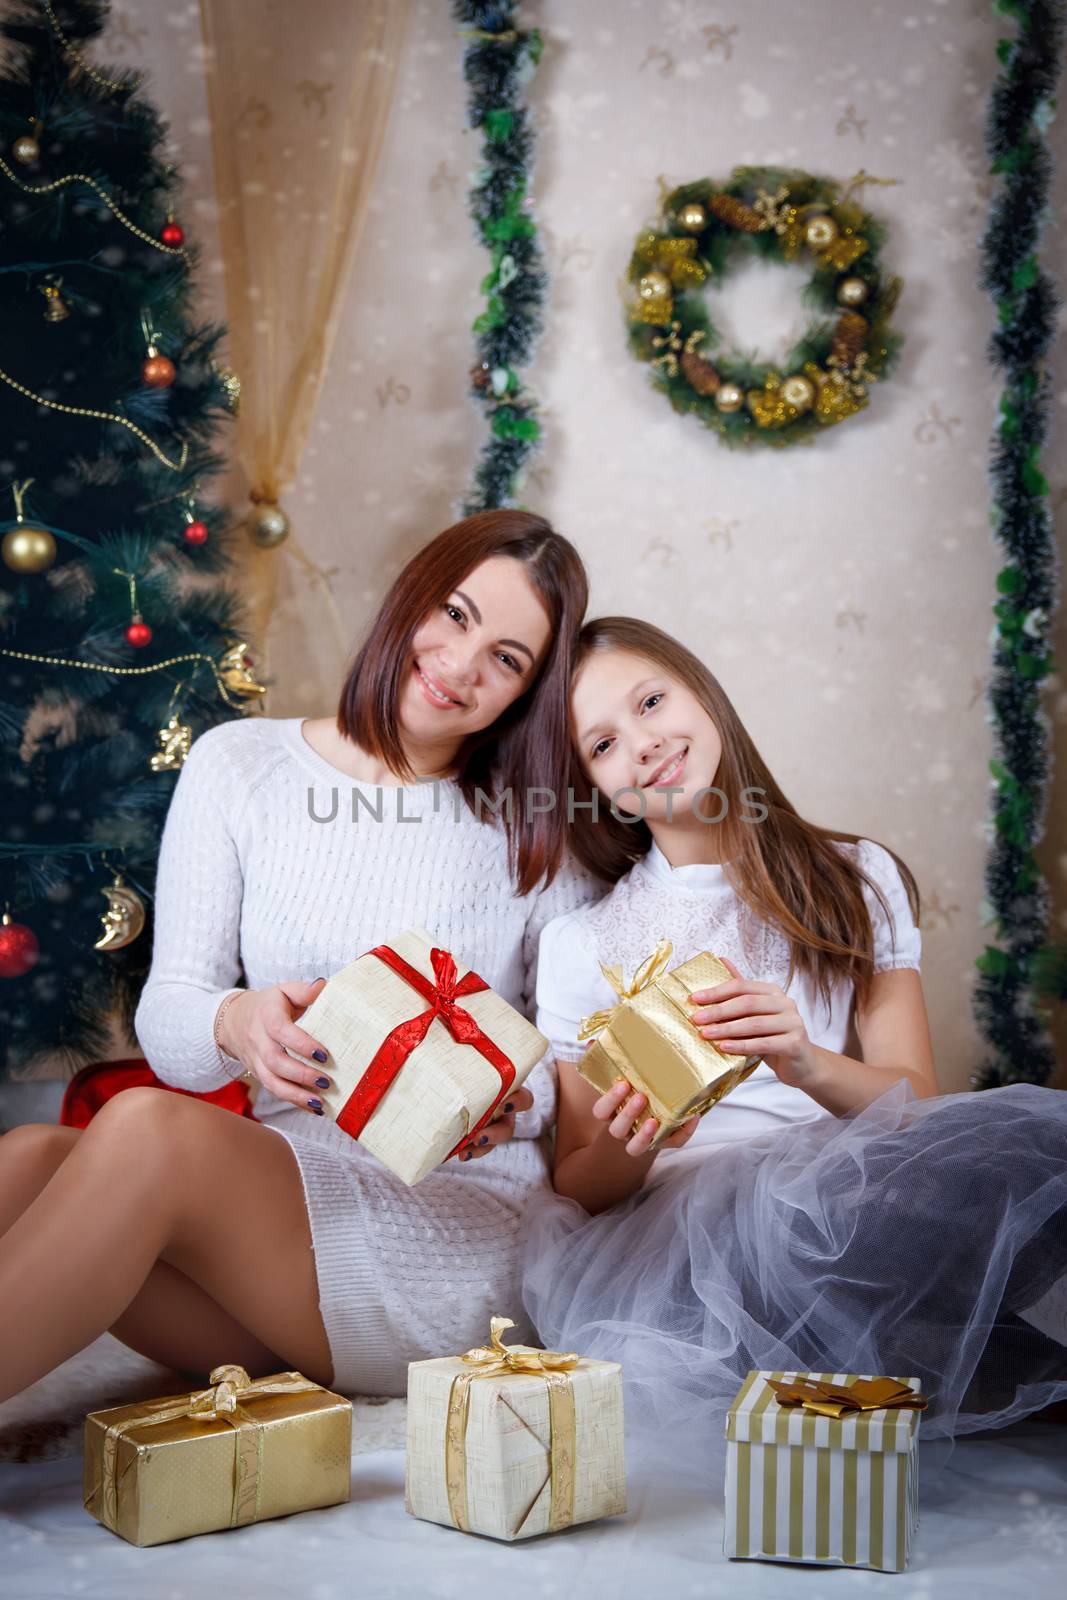 Smiling daughter and mother holding Christmas gifts